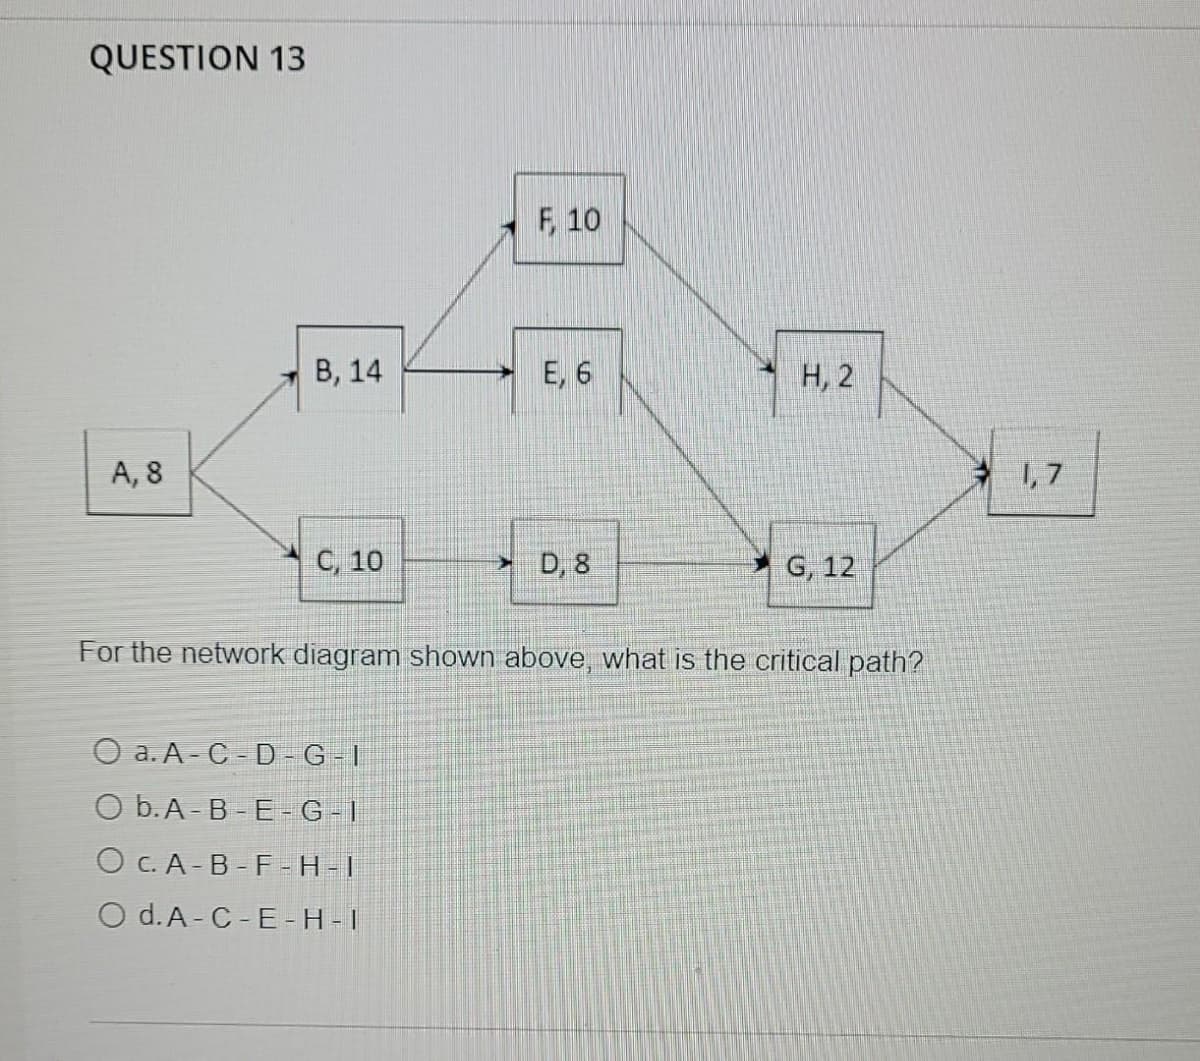 QUESTION 13
B, 14
H, 2
A, 8
C, 10
D, 8
G, 12
For the network diagram shown above, what is the critical path?
O a. A-C-D-G-I
O b. A-B-E-G-I
OC. A-B-F-H-I
O d. A-C-E-H-I
F, 10
E, 6
1,7